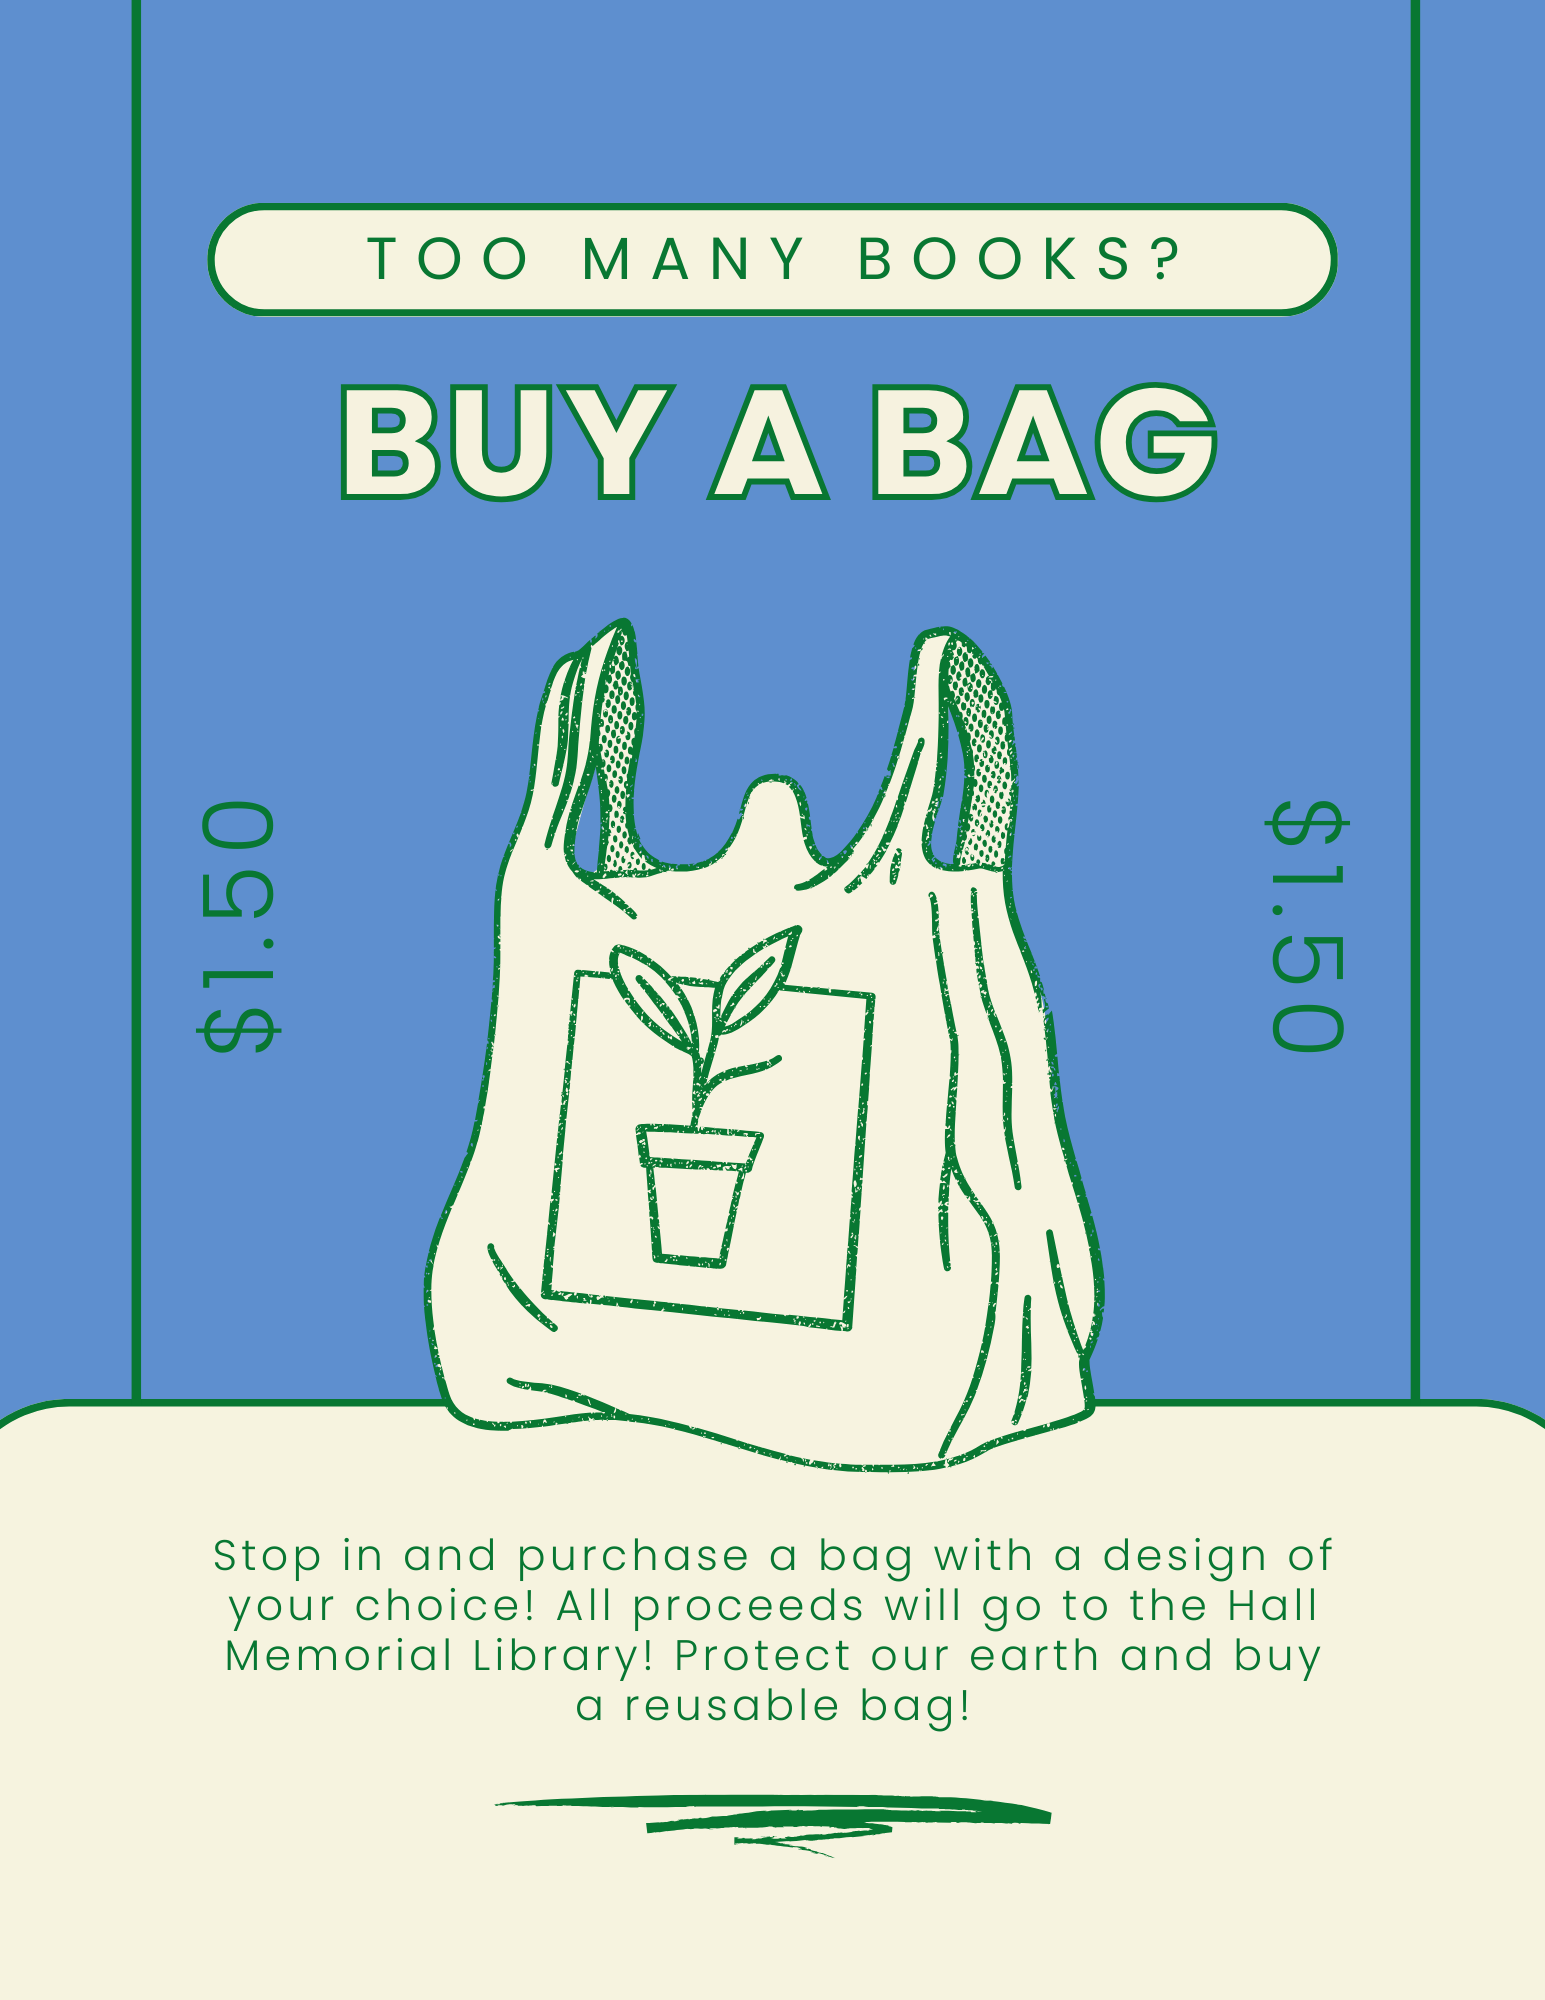 illustraTION OF A PLASTIC BAG, TEXT READS "BUY A BAG"